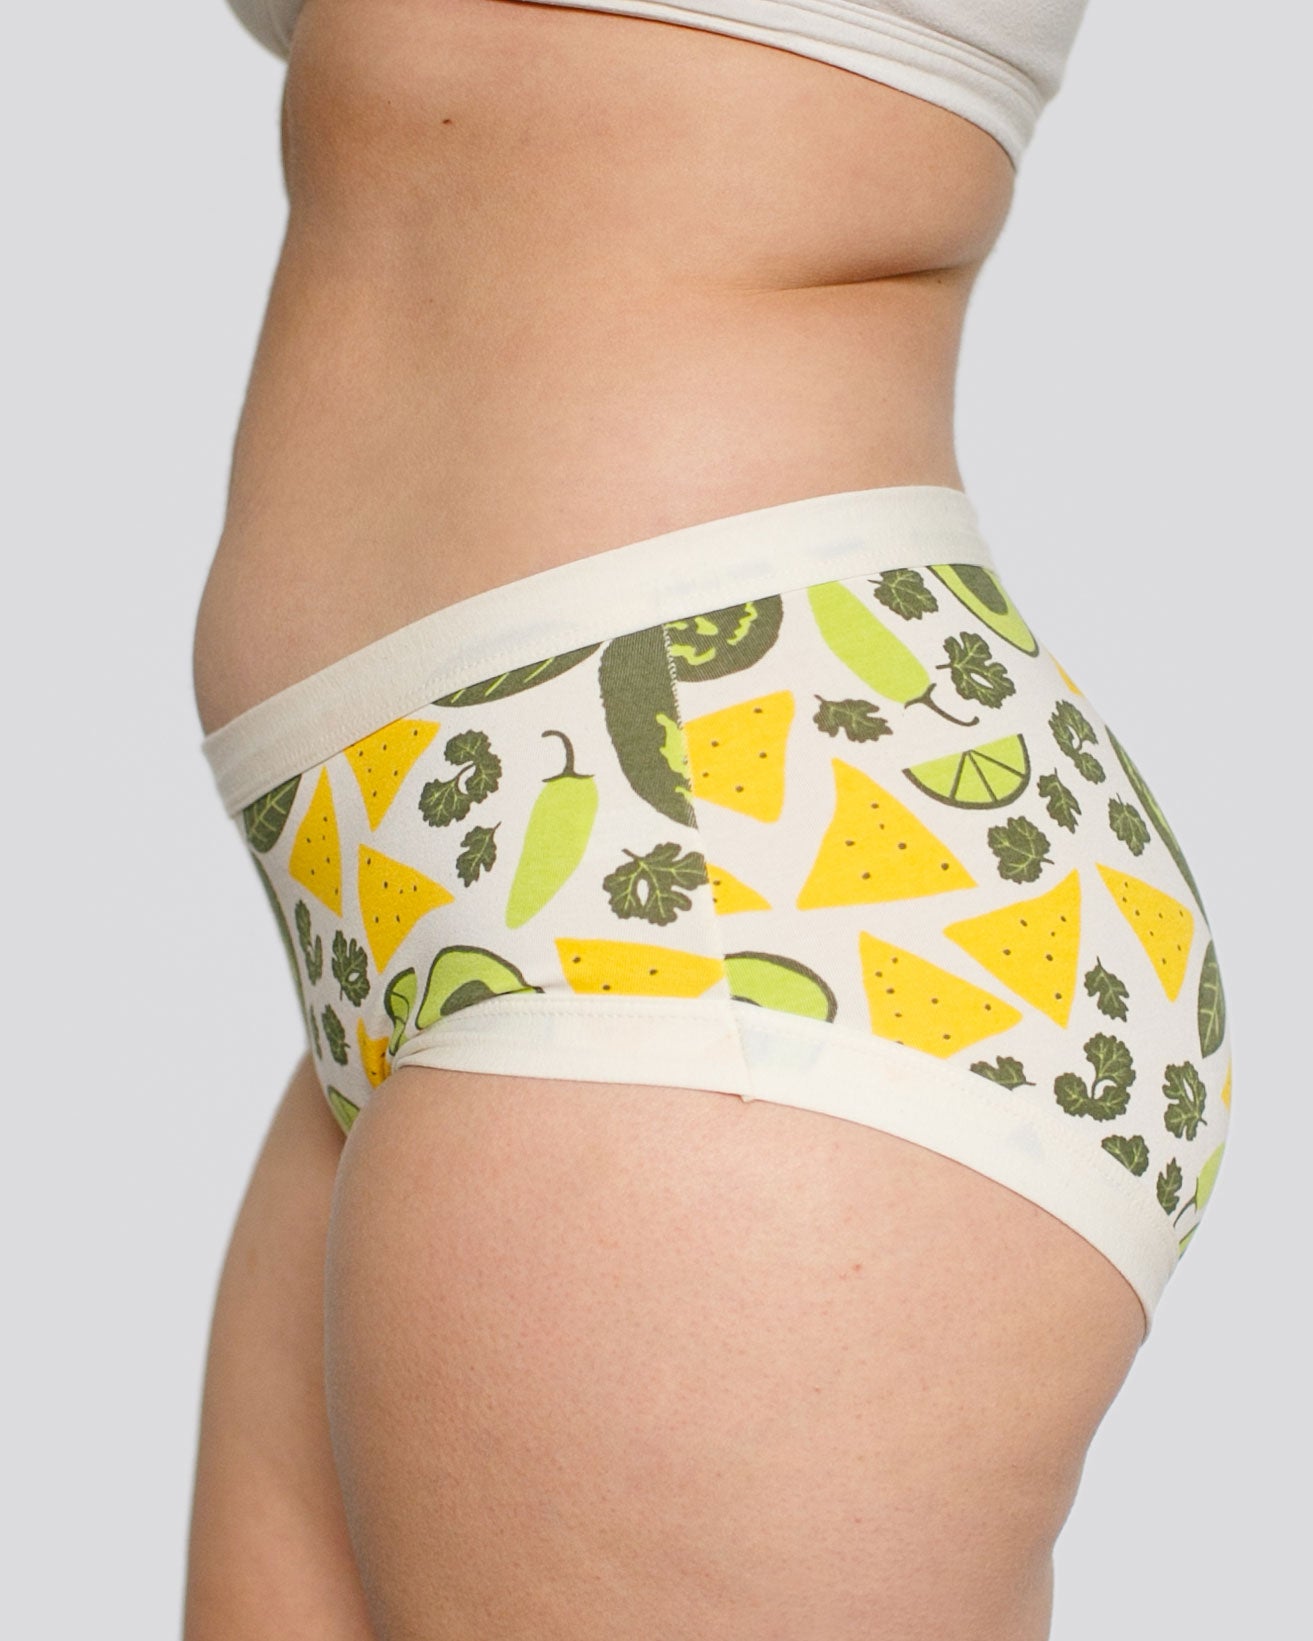 Model's side wearing Thunderpants organic cotton Hipster style underwear in our Party Guac print: deconstructed guacamole print (limes, peppers, cilantro, avocado, and chips).